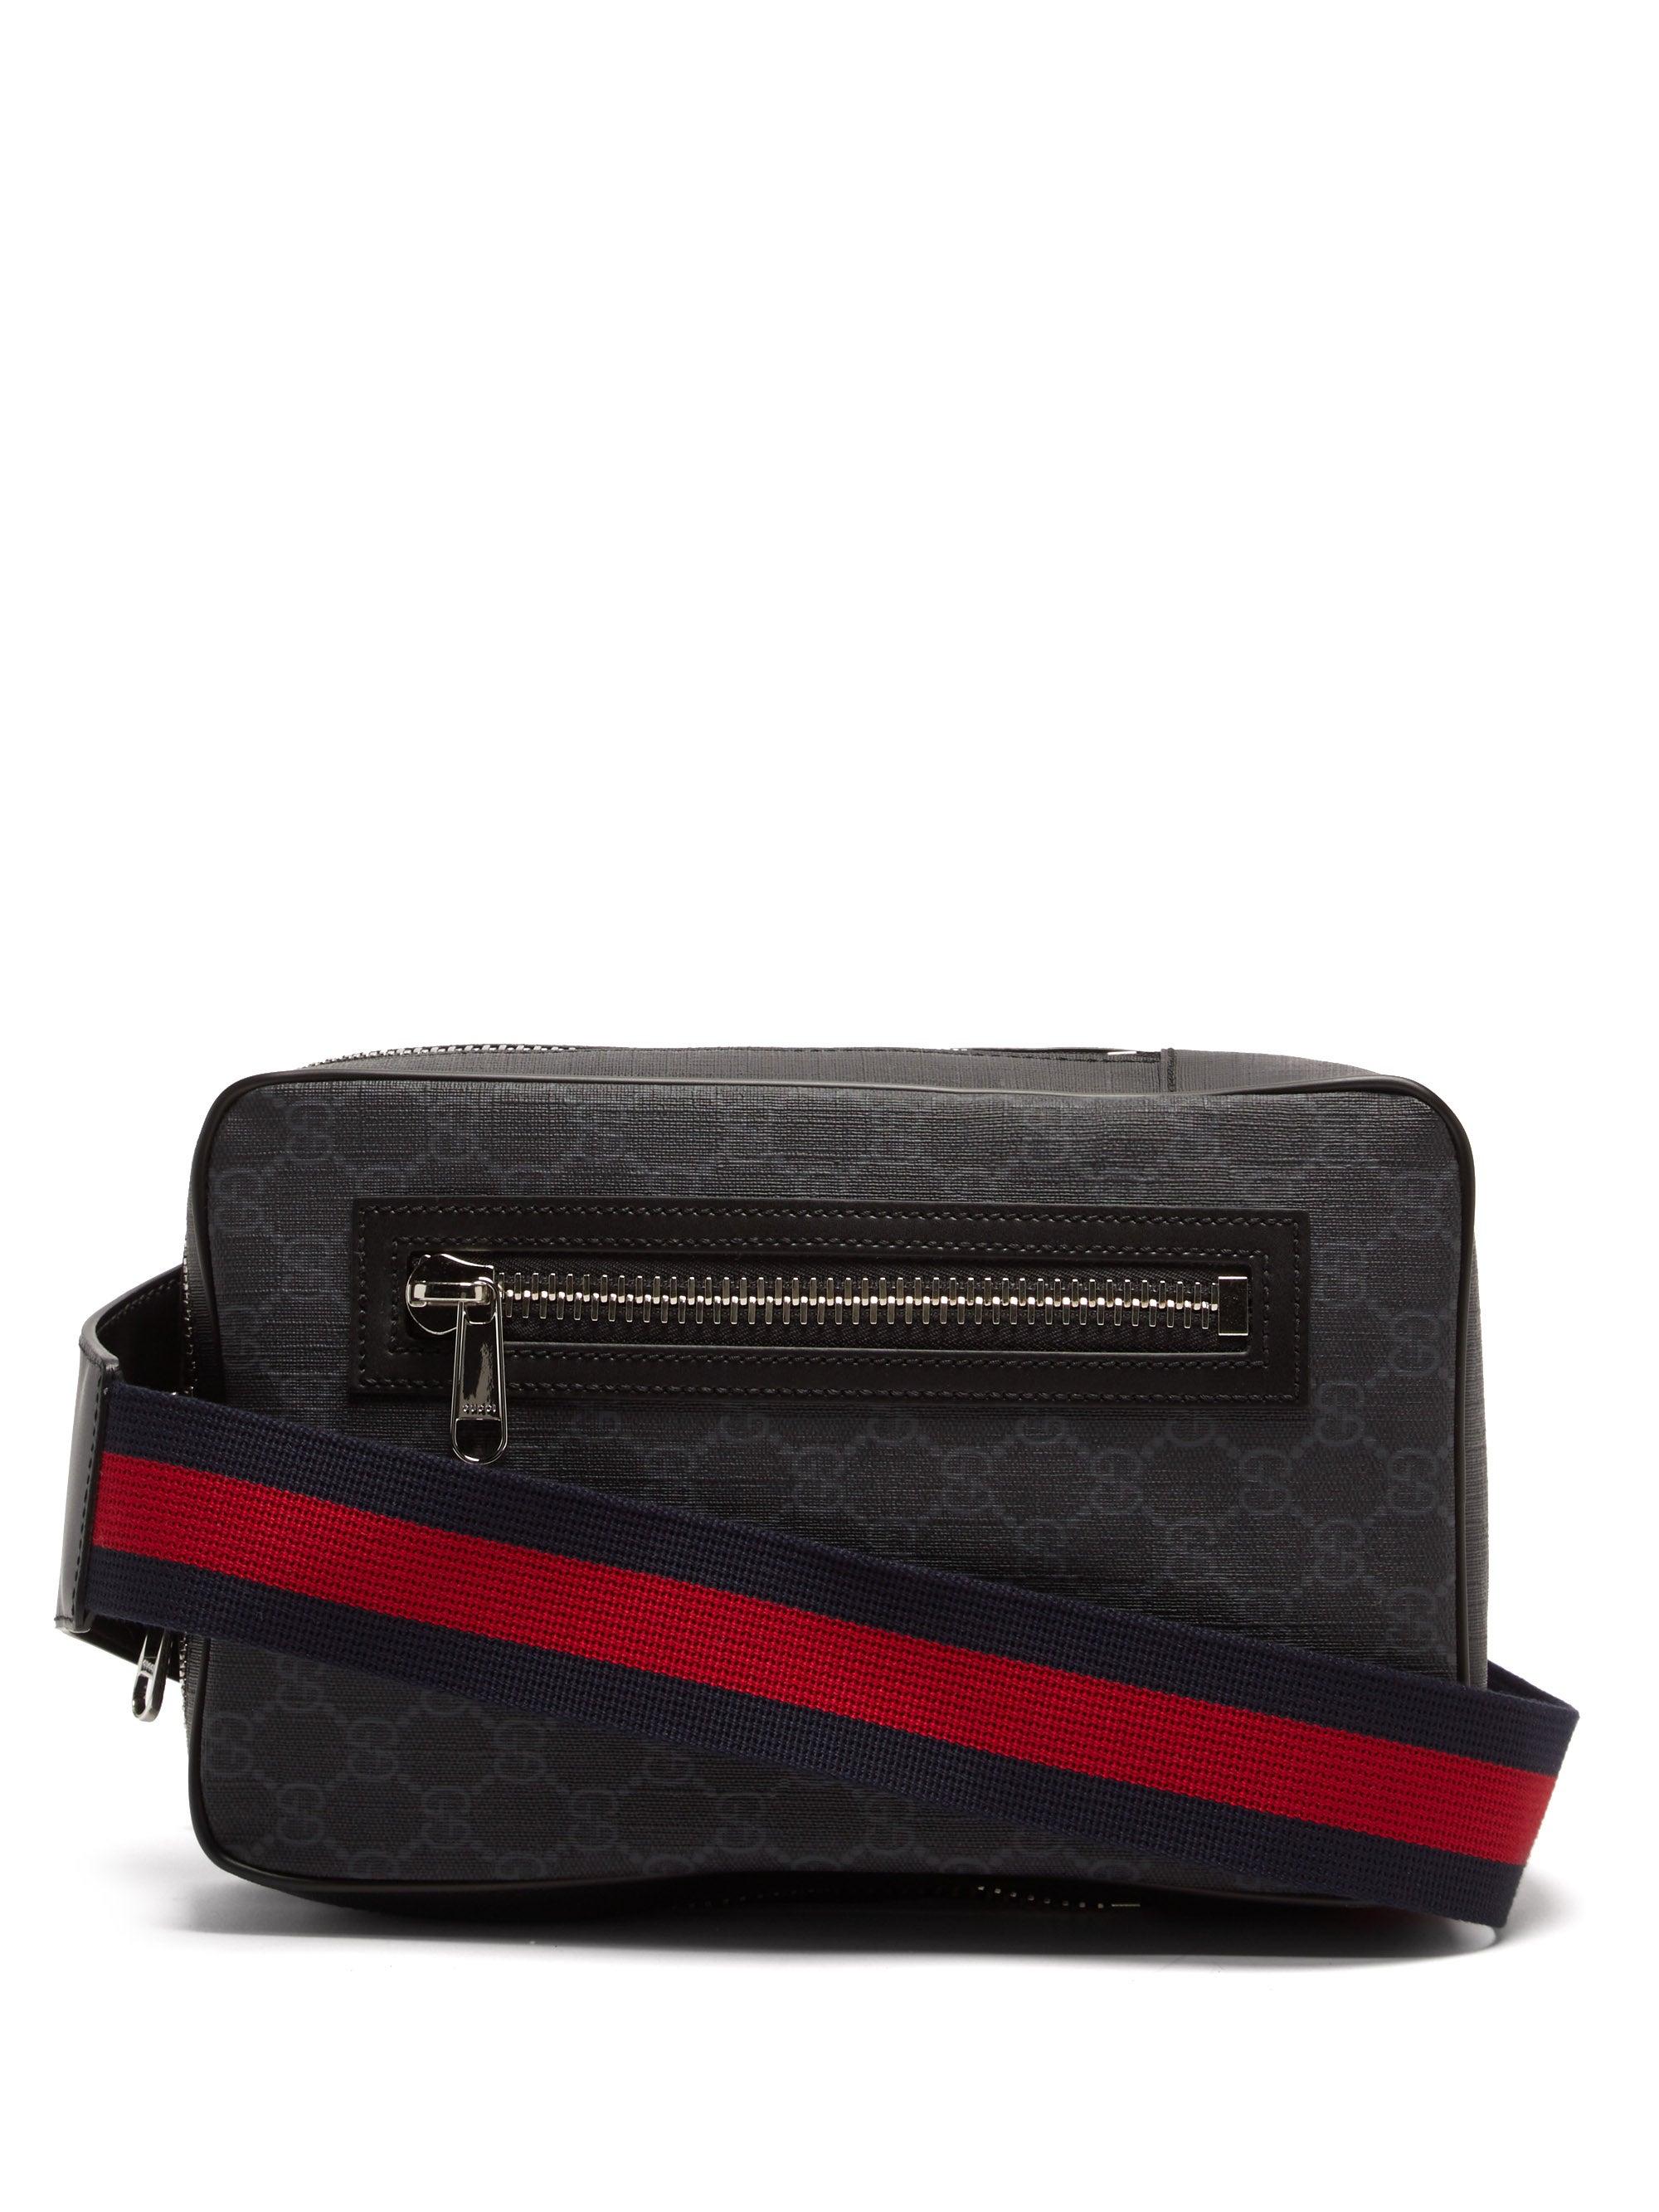 Gucci GG Supreme Leather Cross-body Bag in Black for Men | Lyst